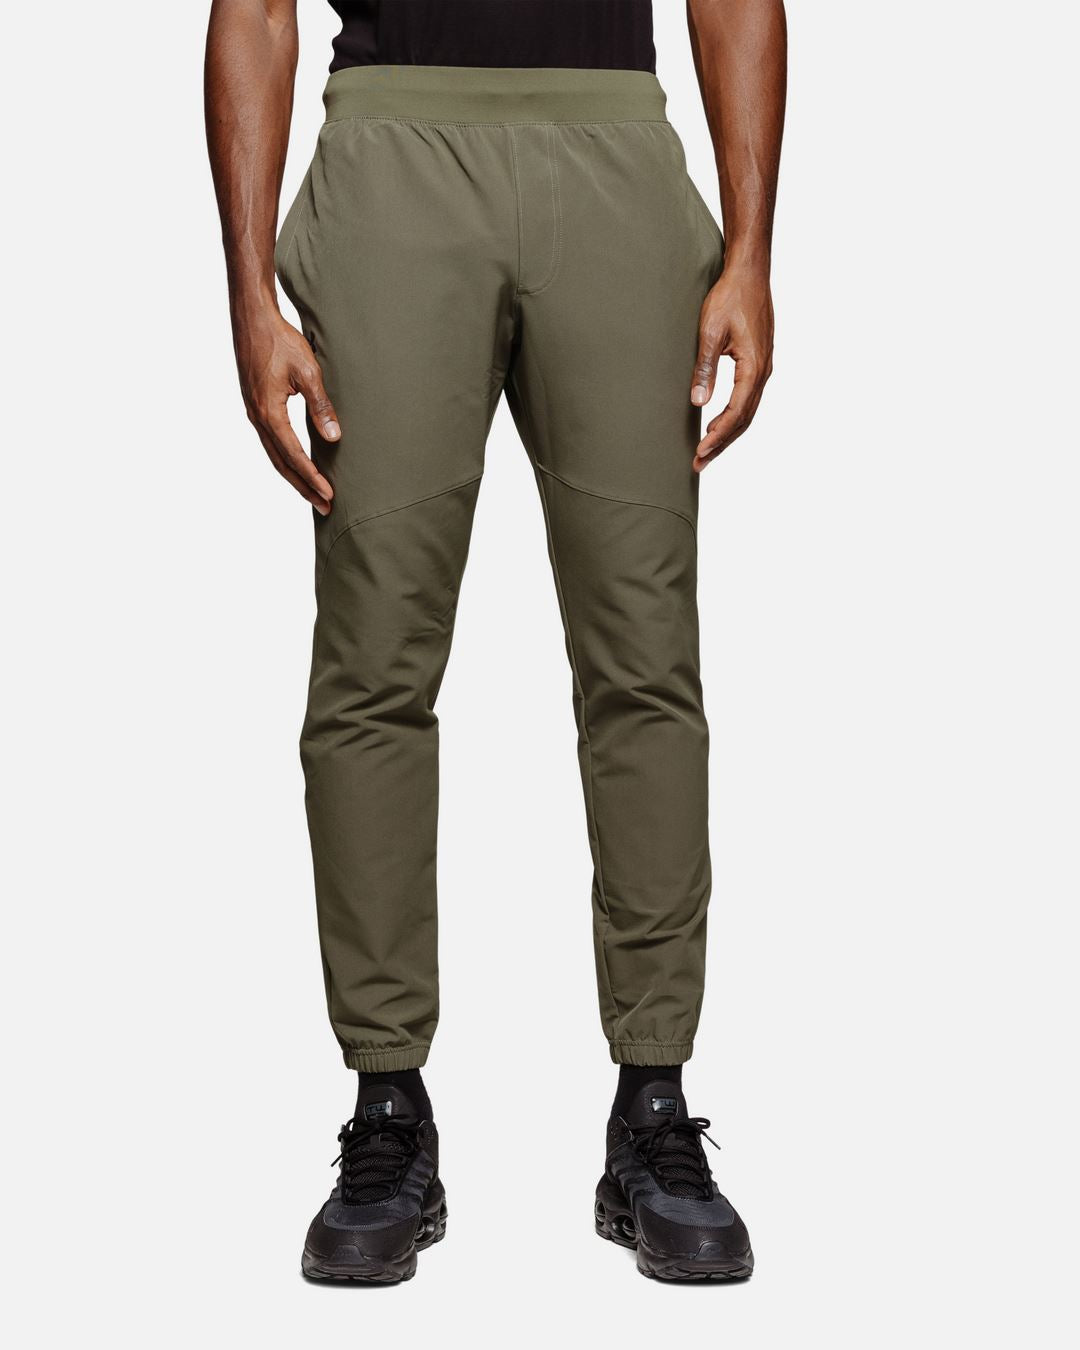 Under Armor Stretch Woven Cold Weather Pants - Green - 1379683-390